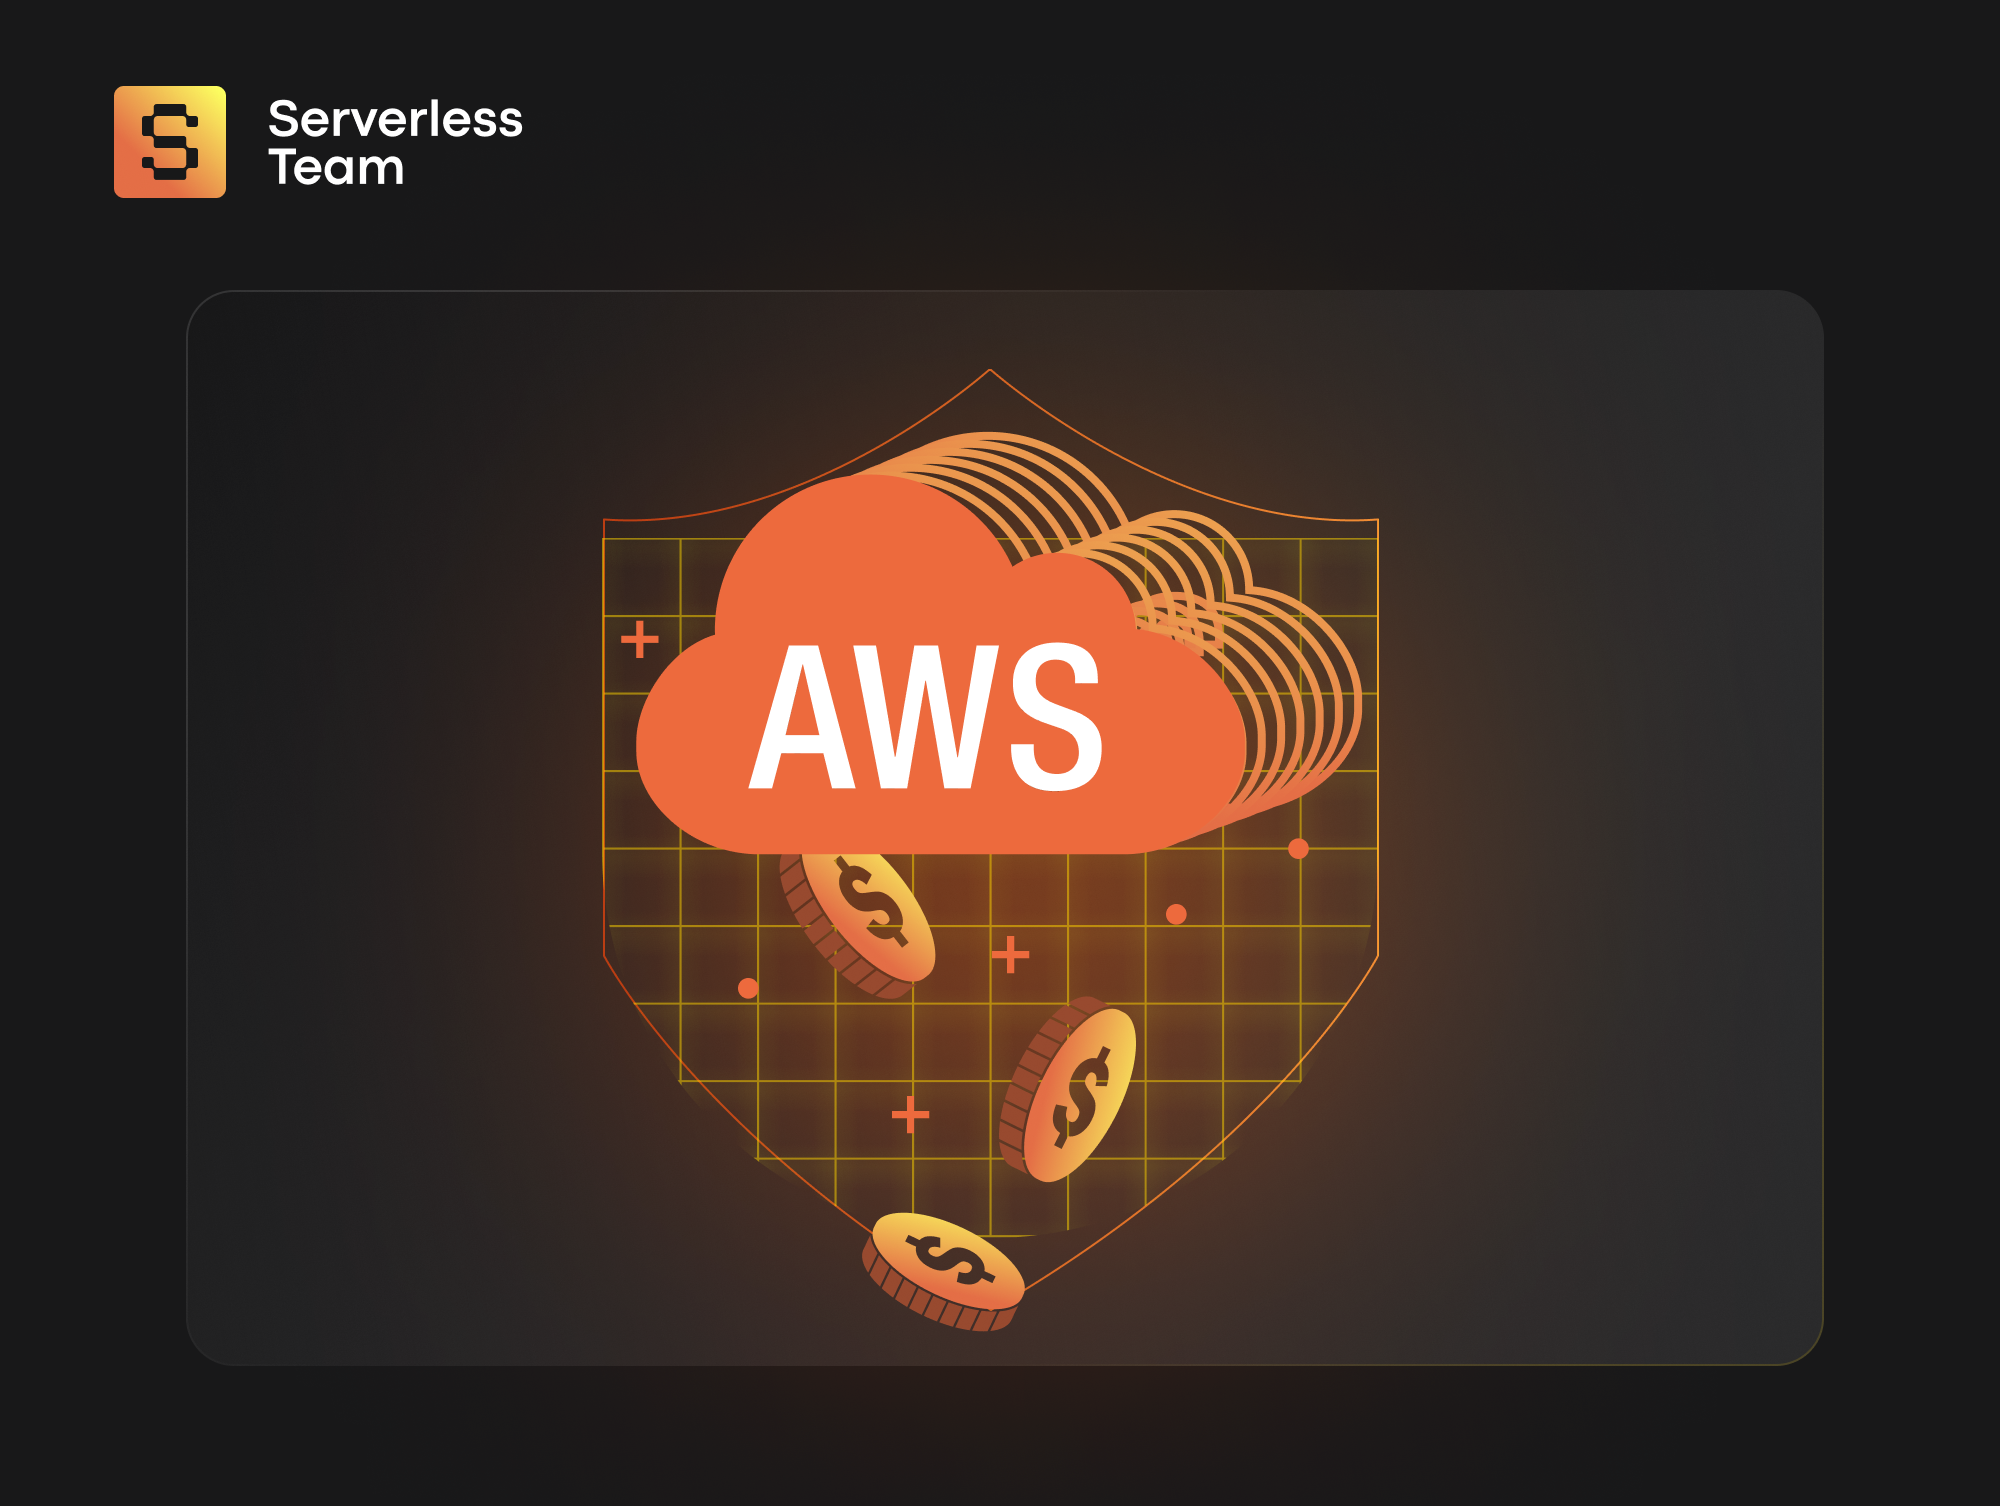 Coins falling out of the cloud that stands for AWS cloud provider. 